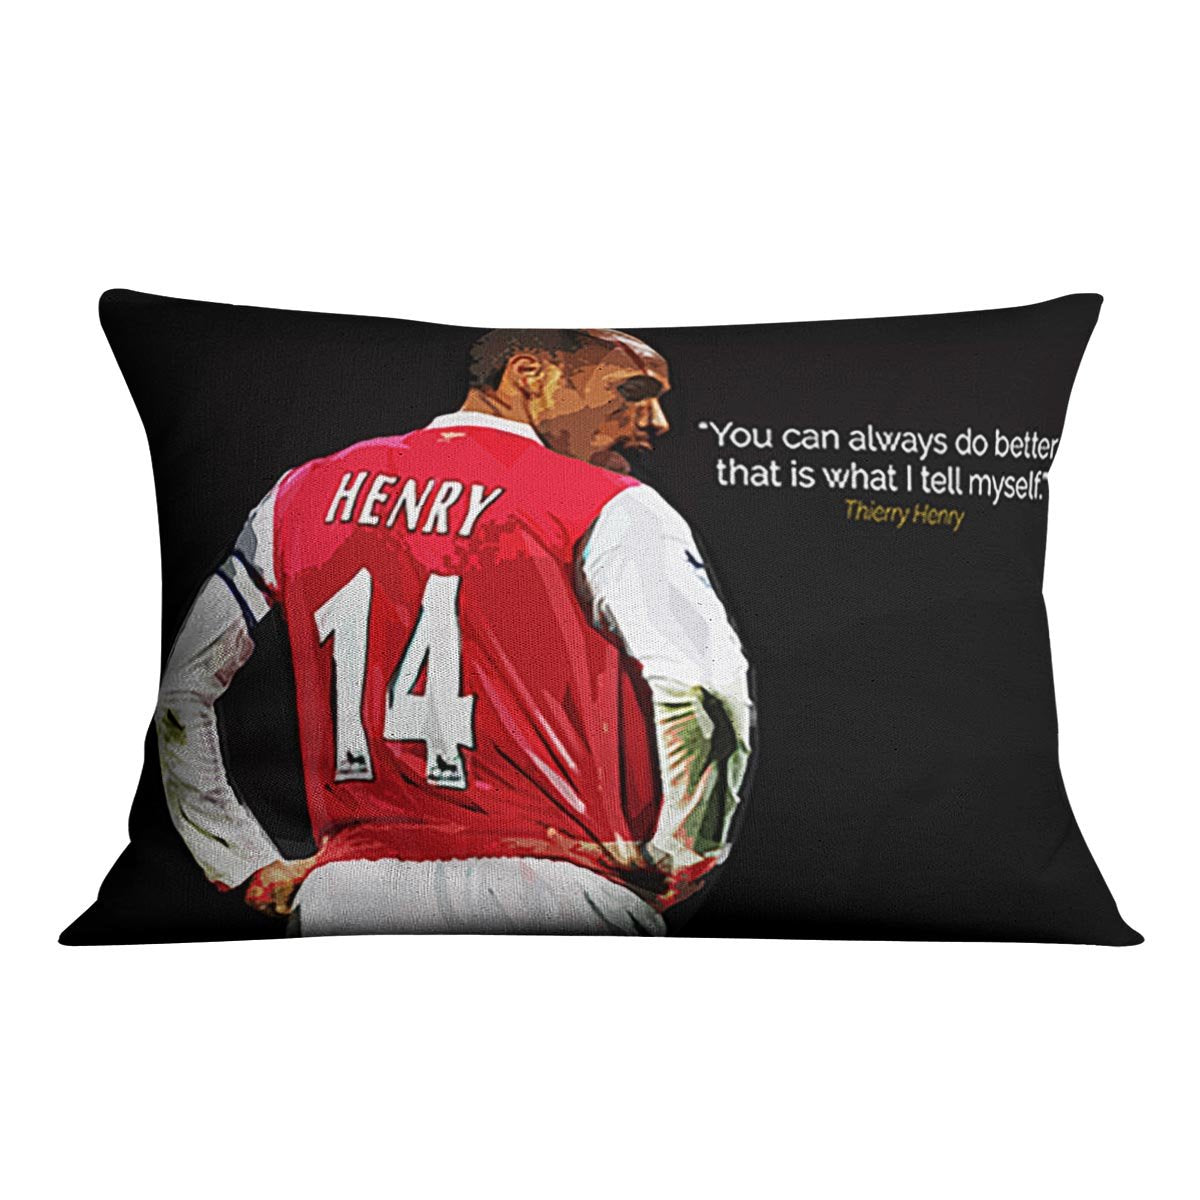 Thierry Henry You Can Alway Do Better Cushion